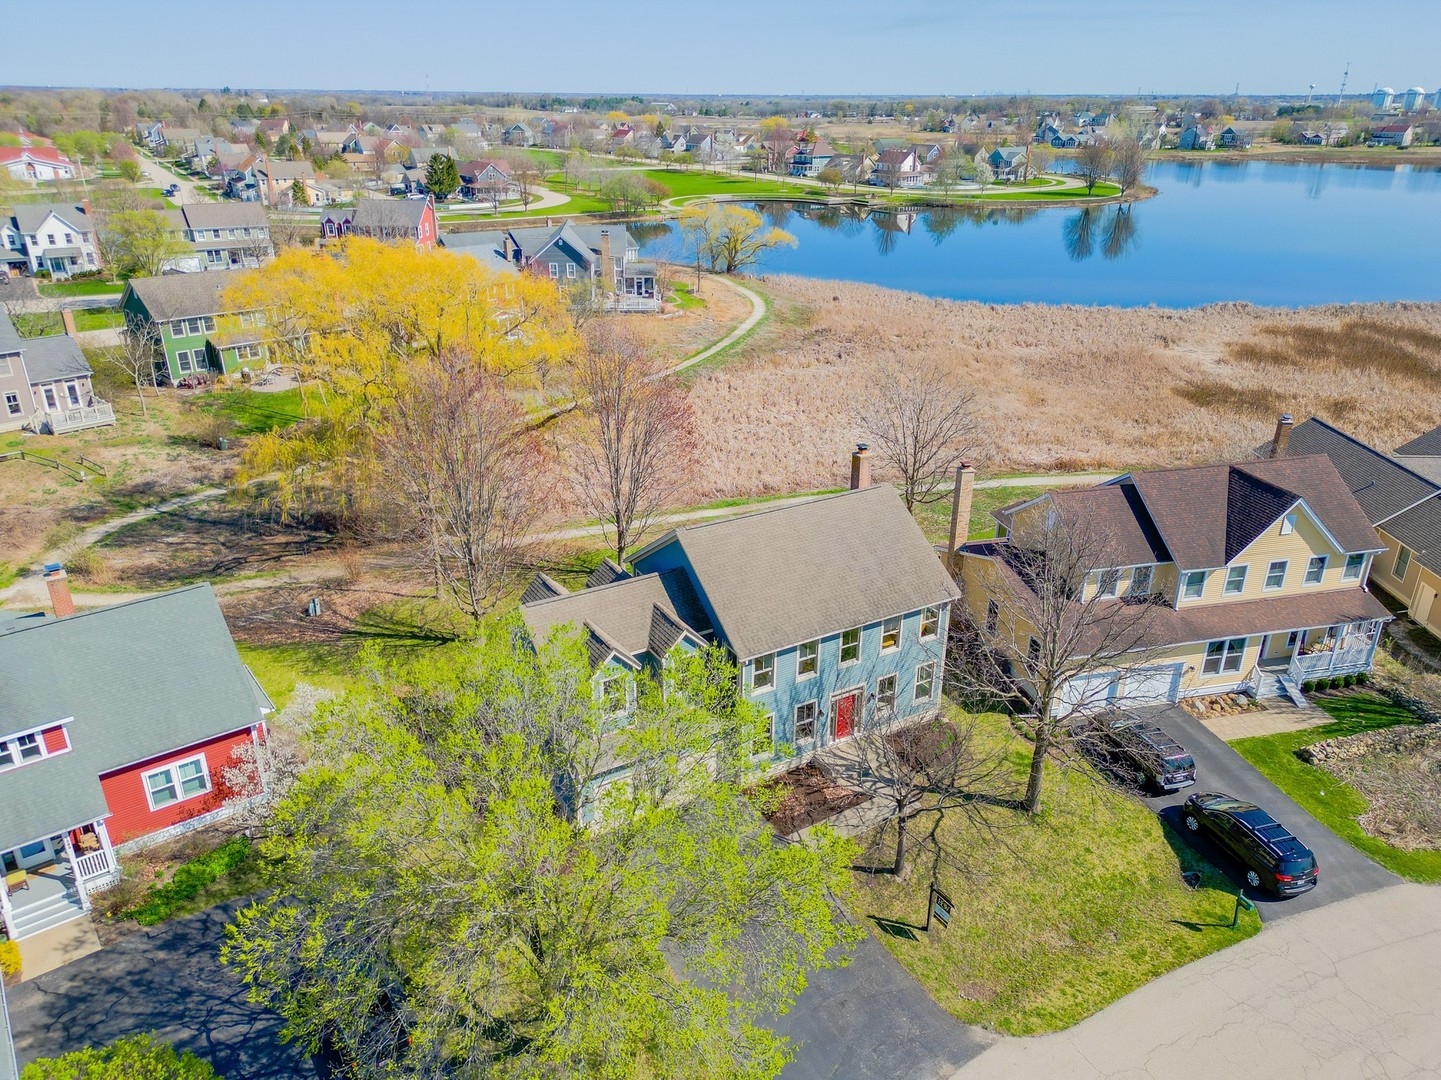 an aerial view of residential houses with outdoor space and river